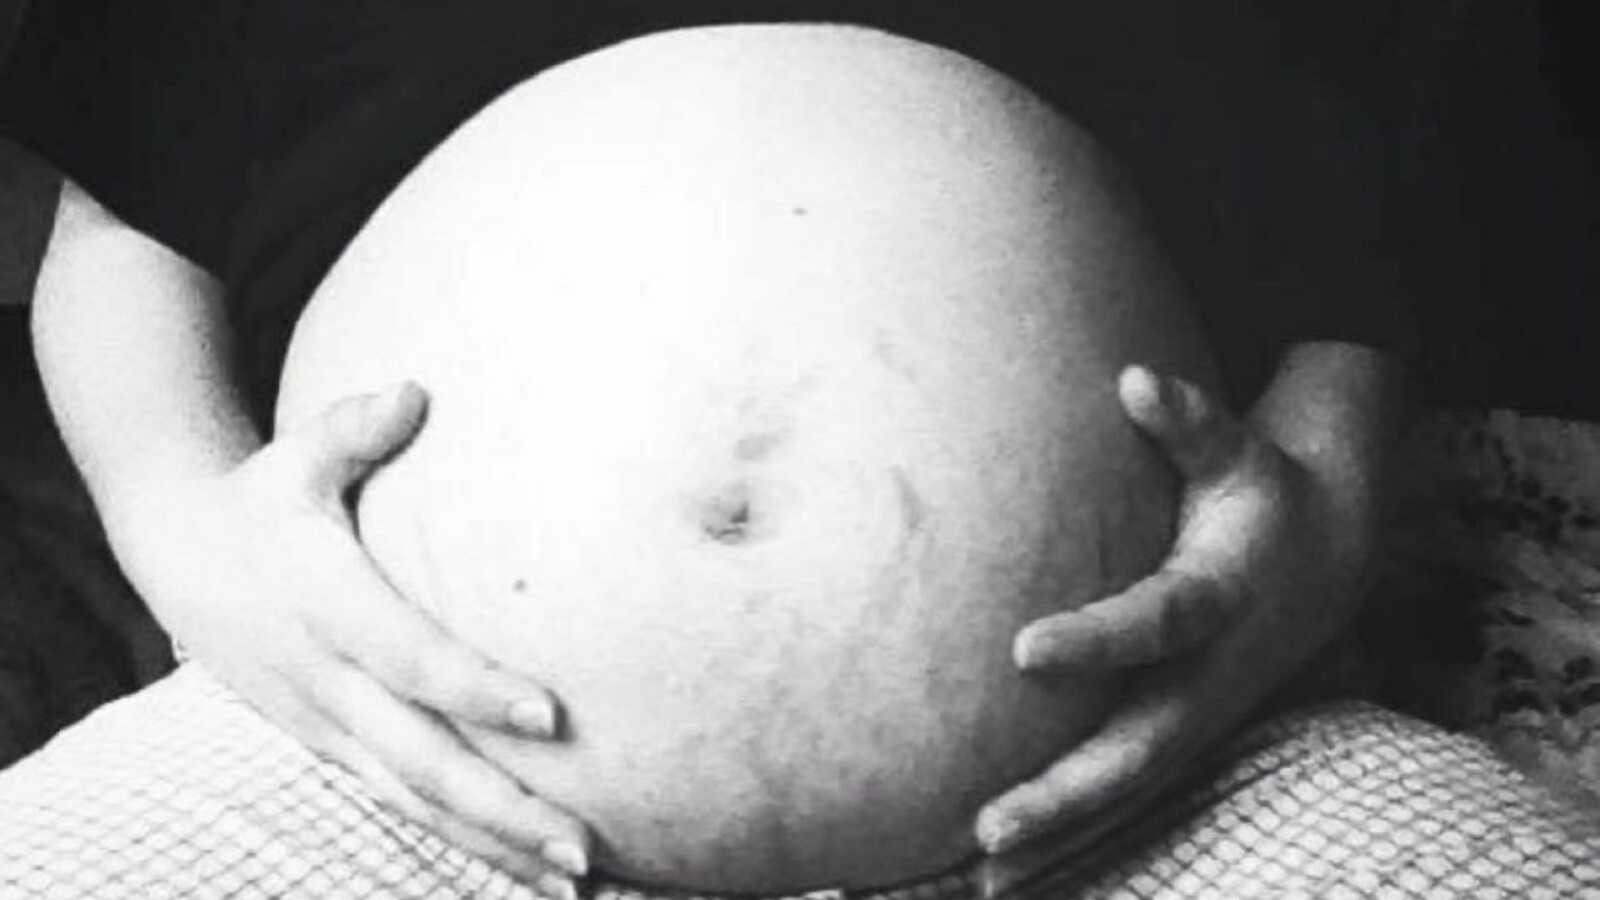 Very pregnant woman takes a close up of her growing belly while she holds it